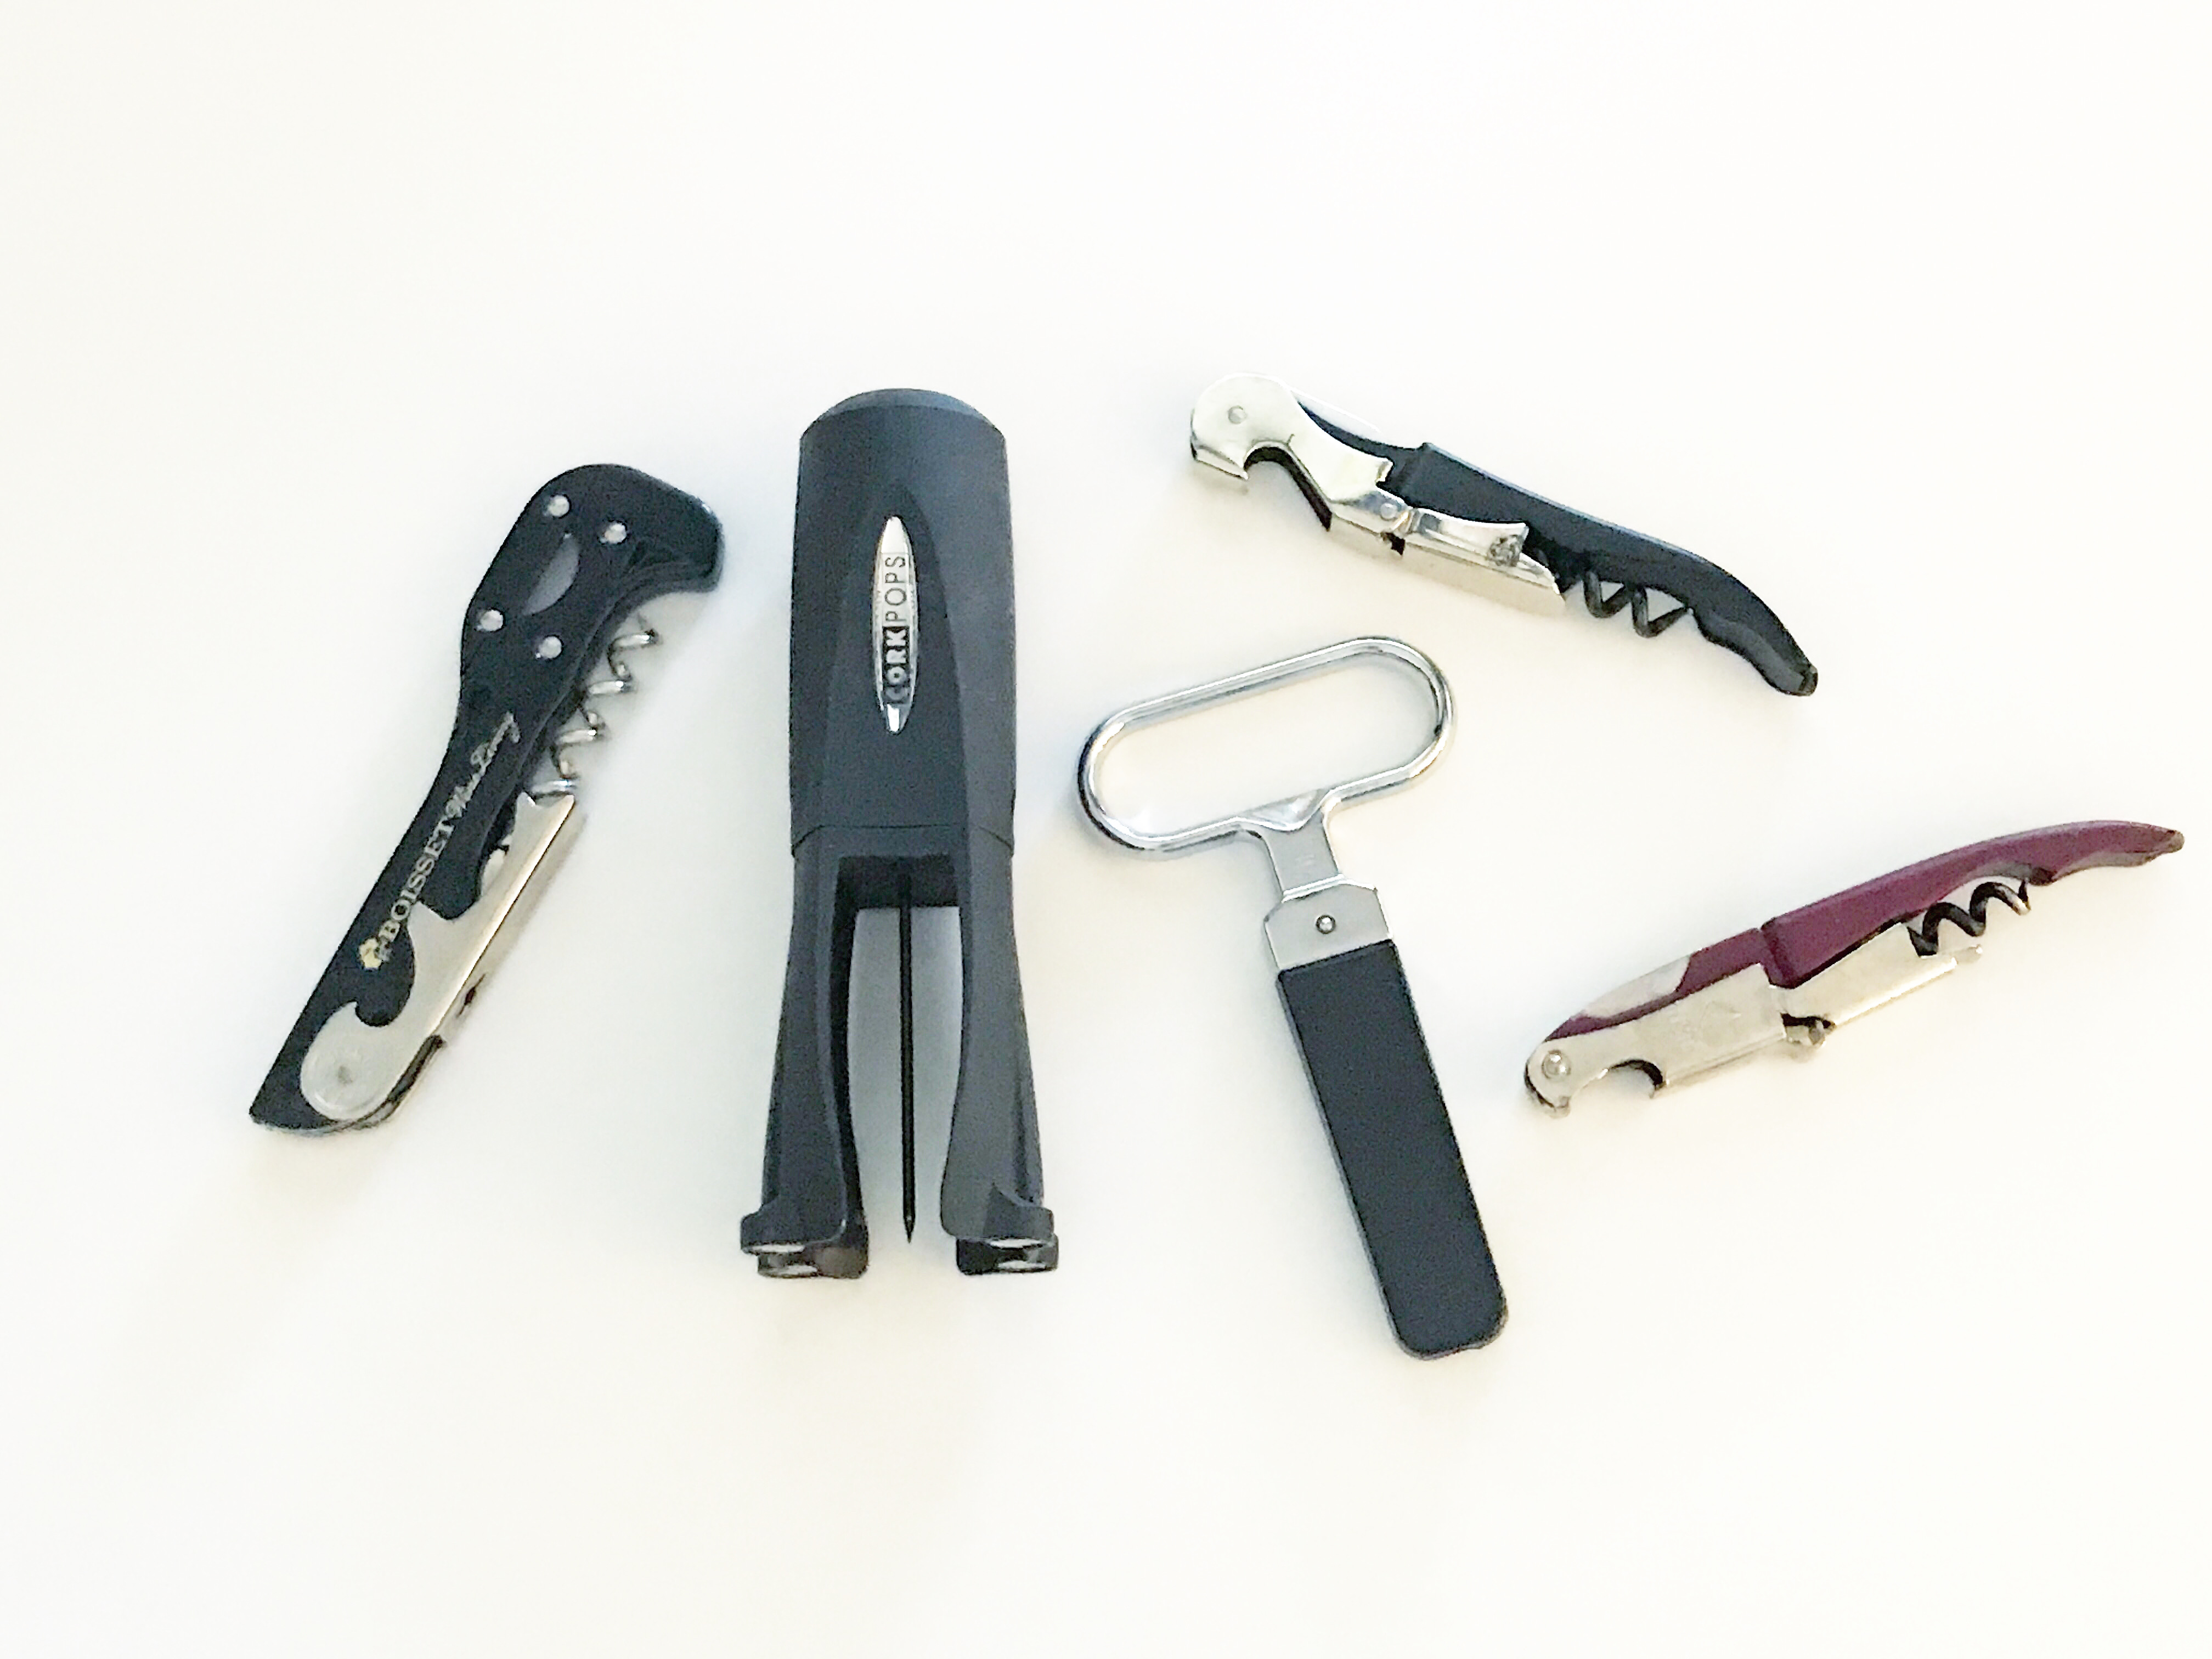 How many corkscrews is too many? Learn when multiples make sense.